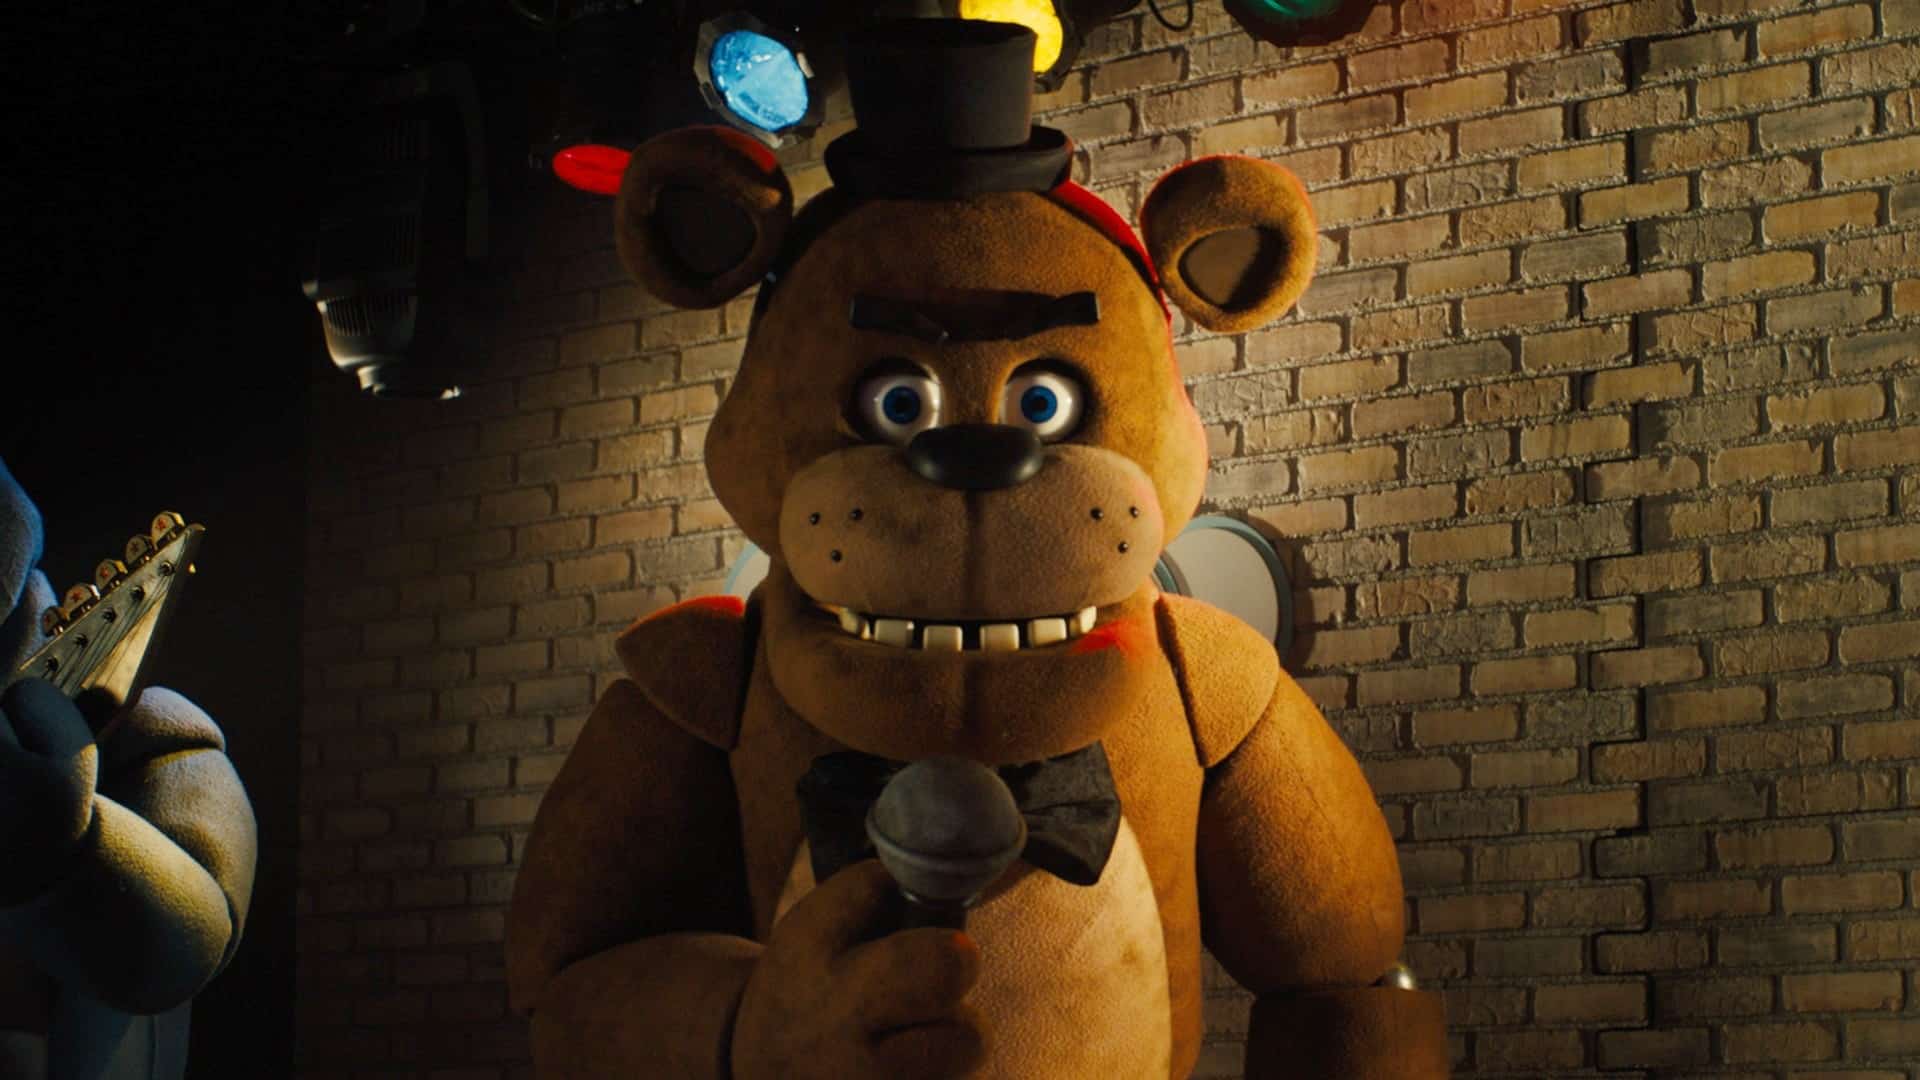 Five Nights at Freddy's director makes scary animatronic claim